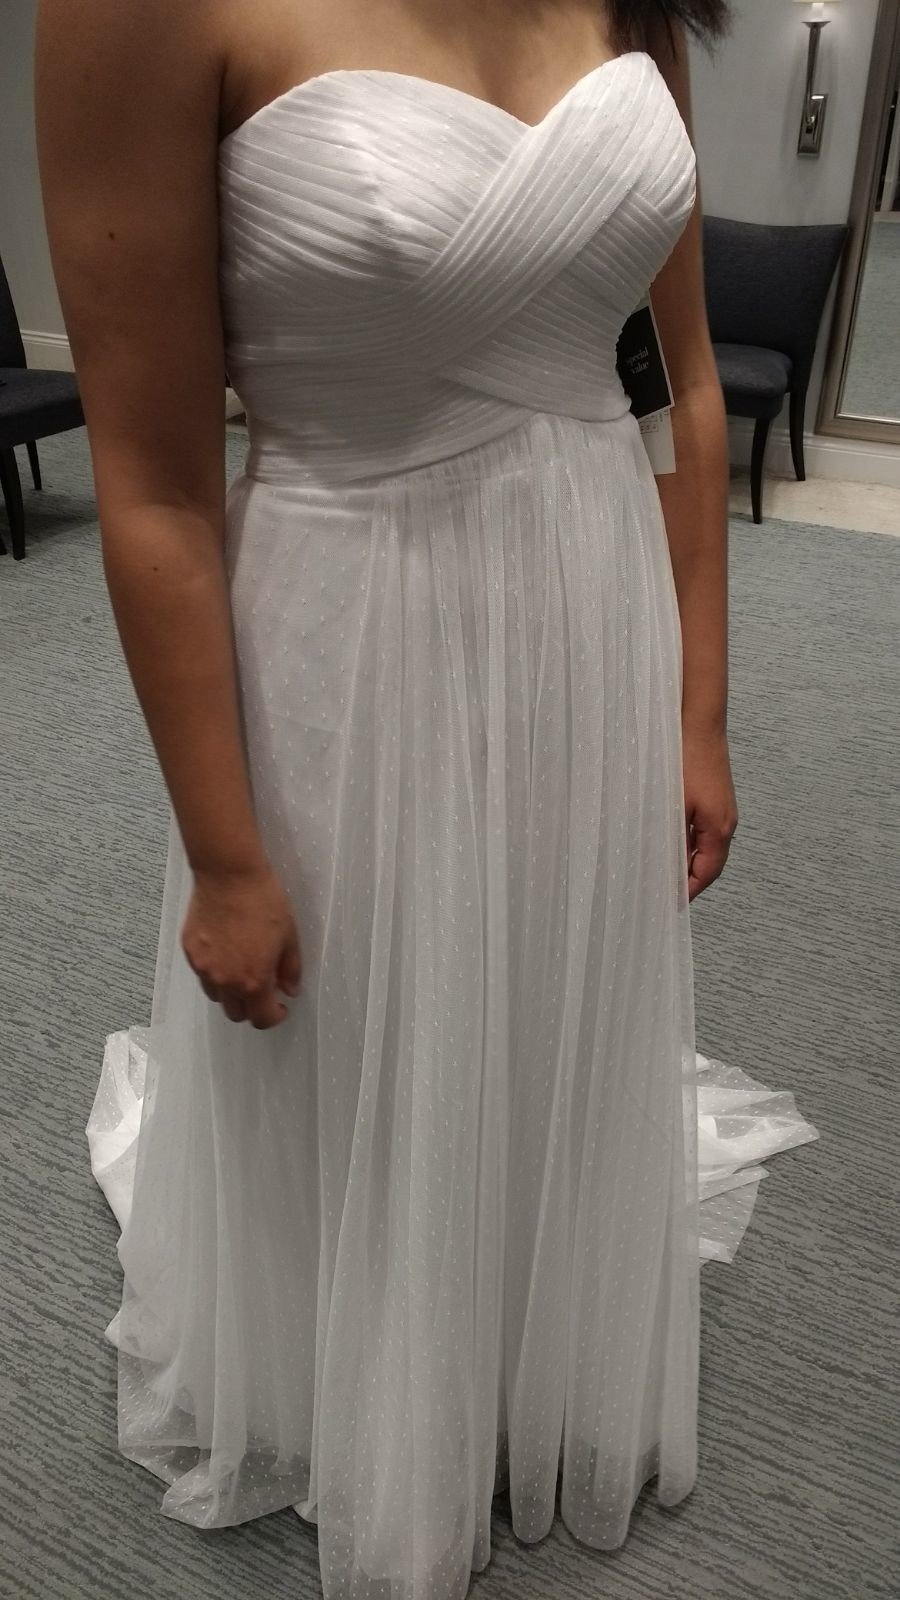 I bought my wedding dress! Can